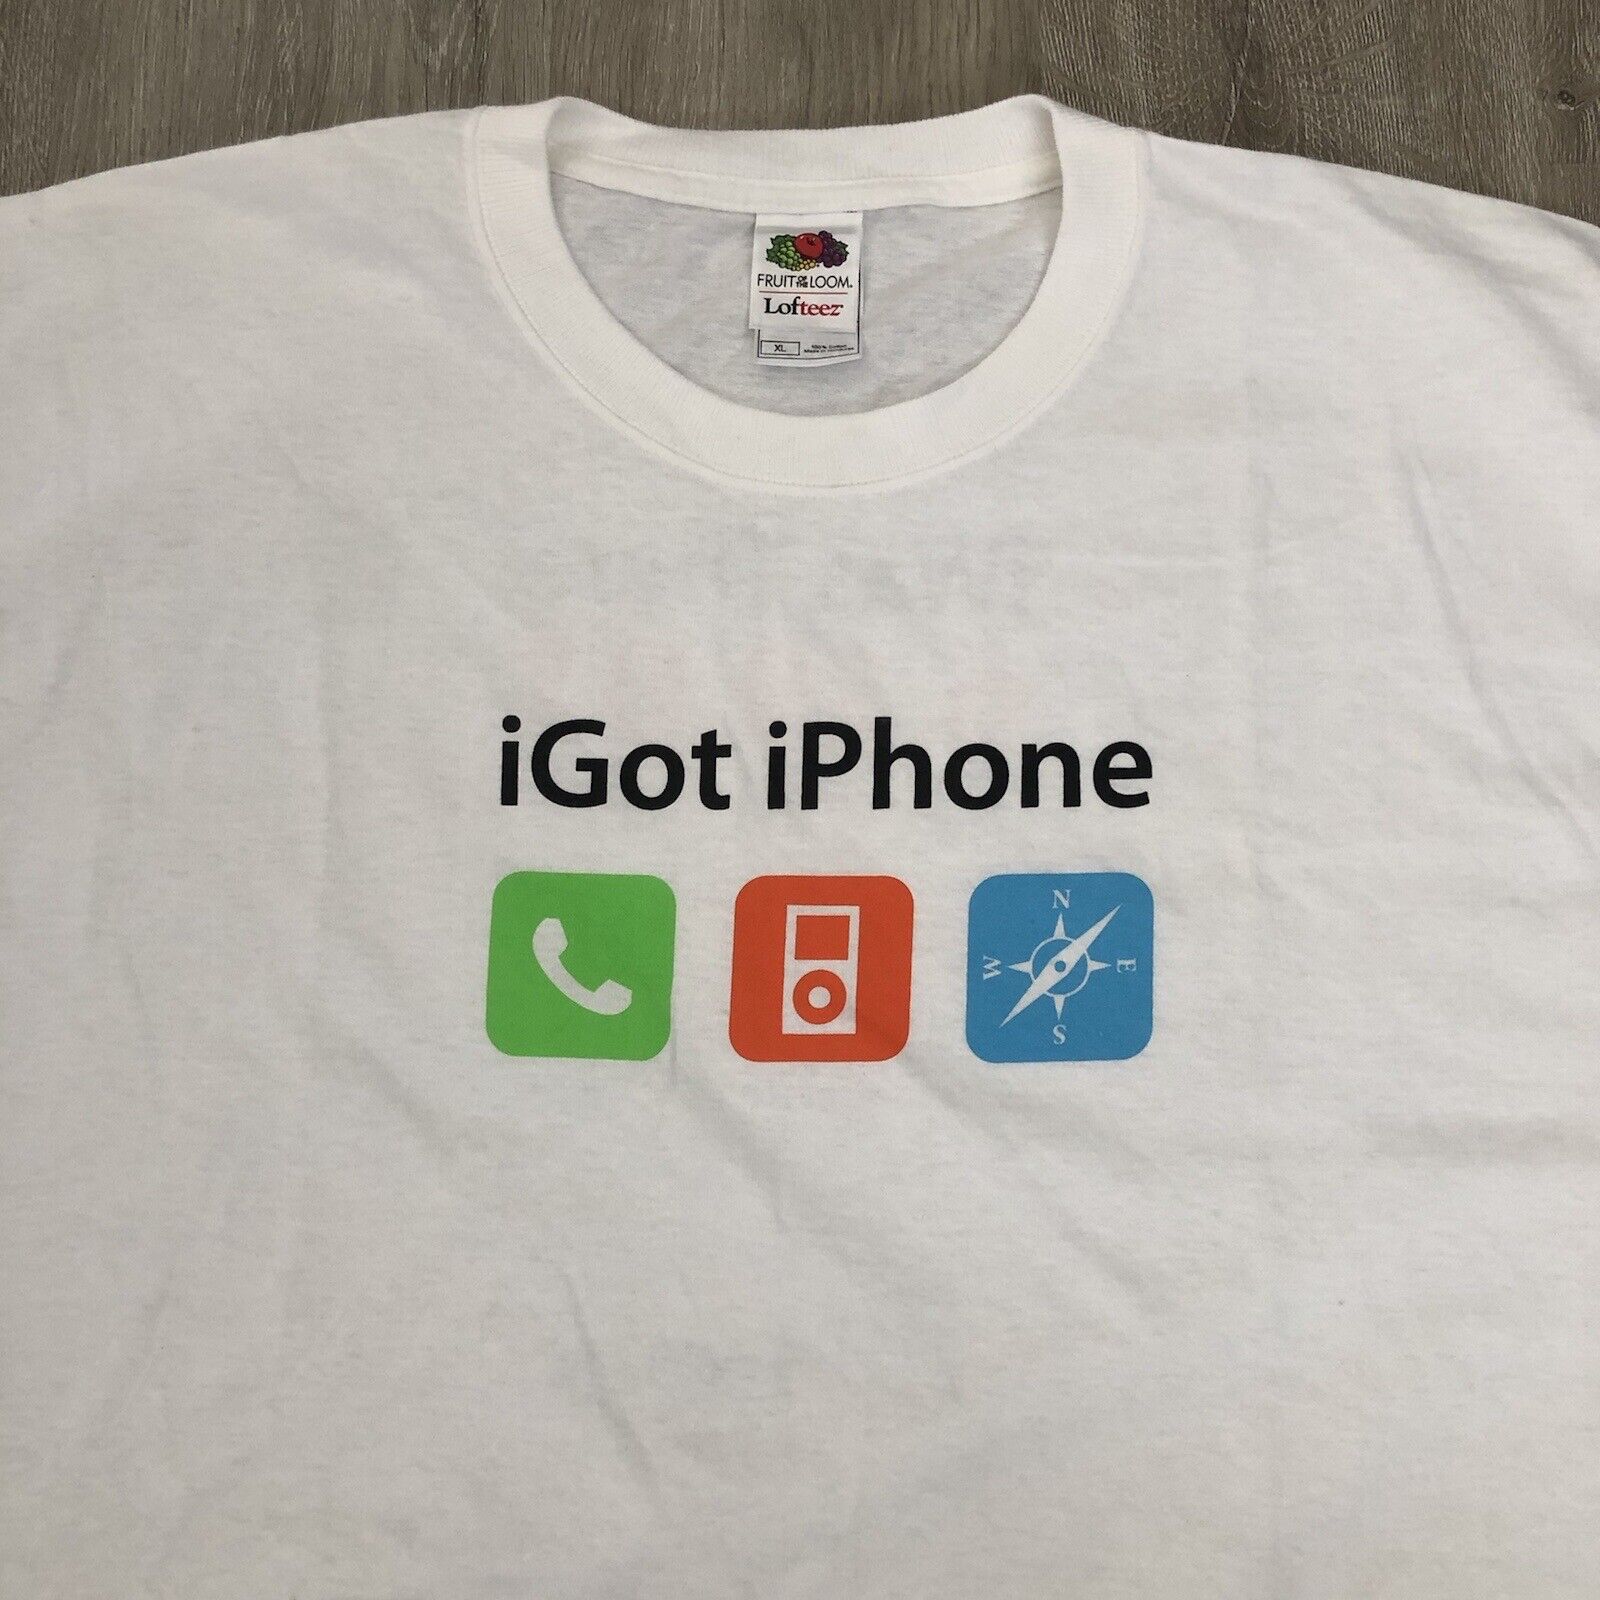 Vtg Apple iGot iPhone Shirt Mens XL Promo Launch Day iWas There 6/29/07 FastMac